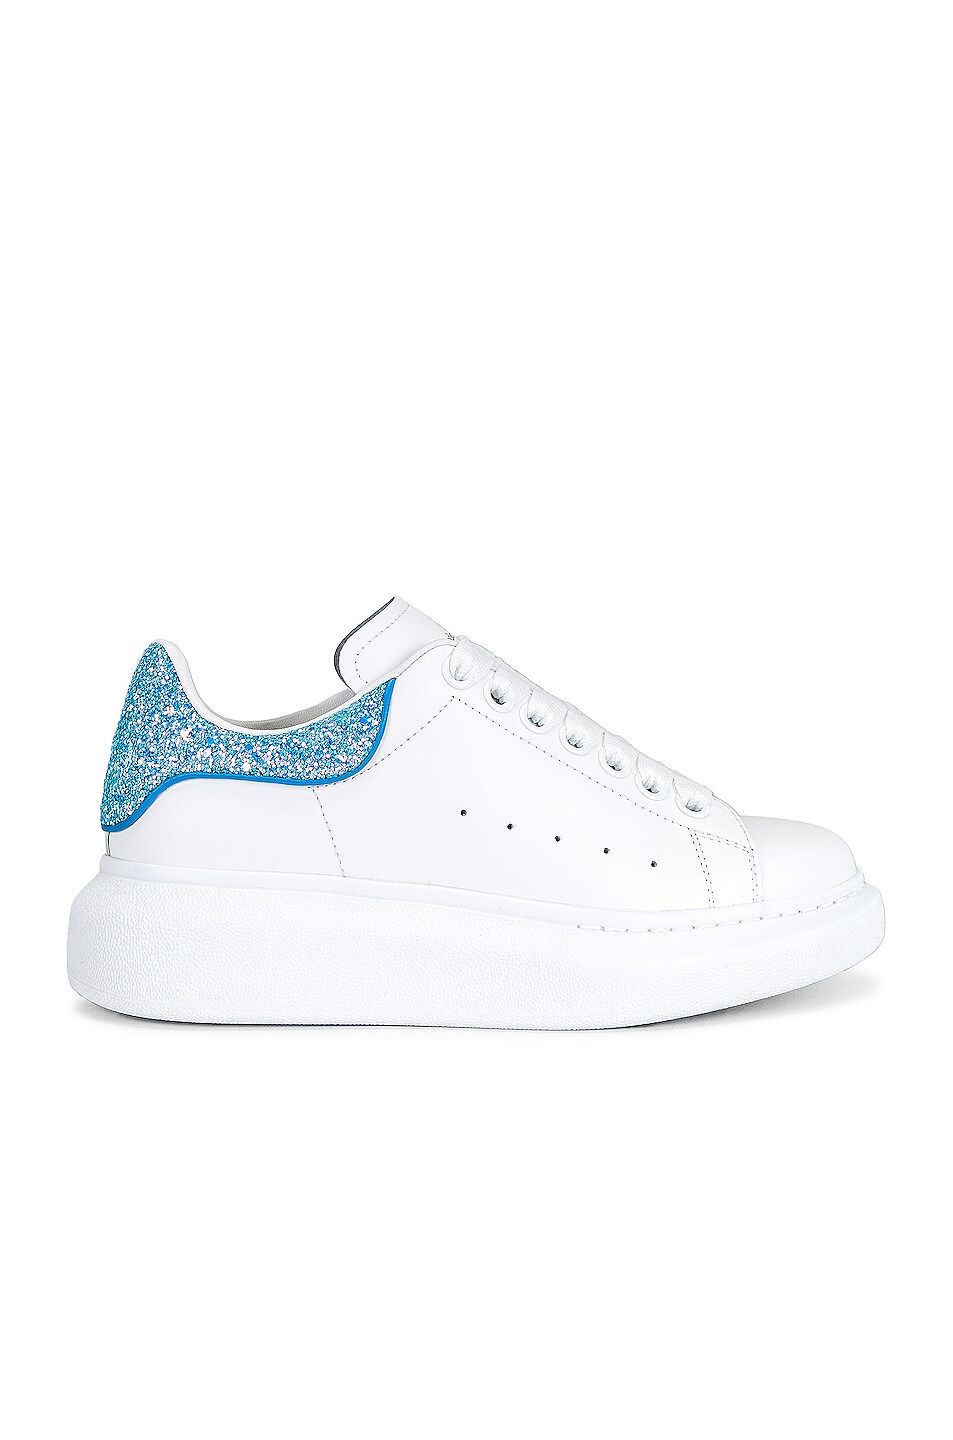 Image 1 of Alexander McQueen Oversized Sneakers in White & Cerulean Blue